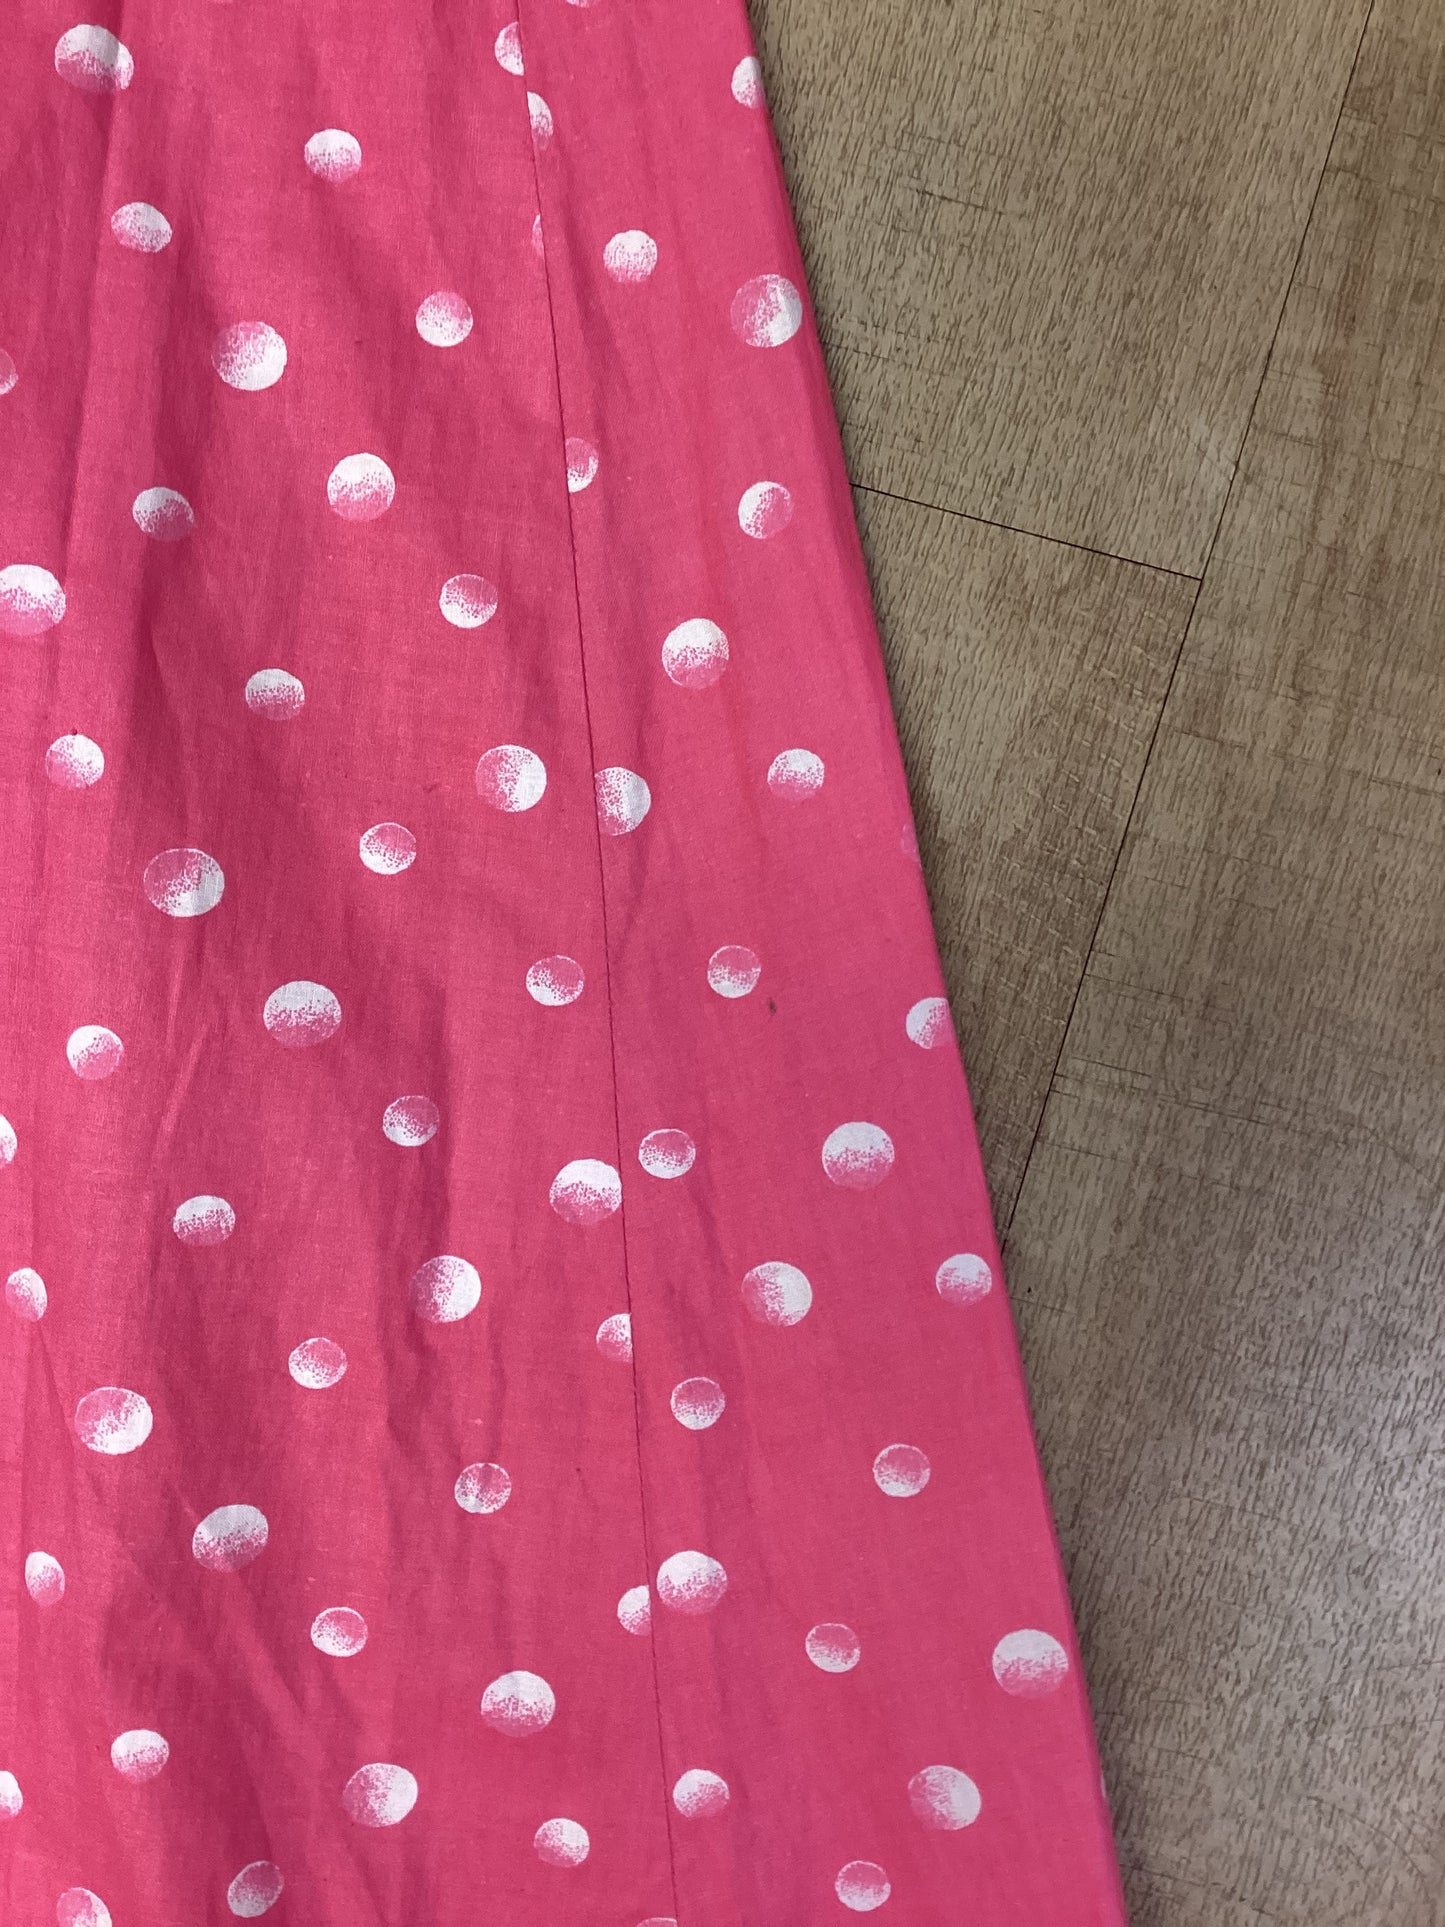 BLANES Pink Dotted Vintage Dress Size M